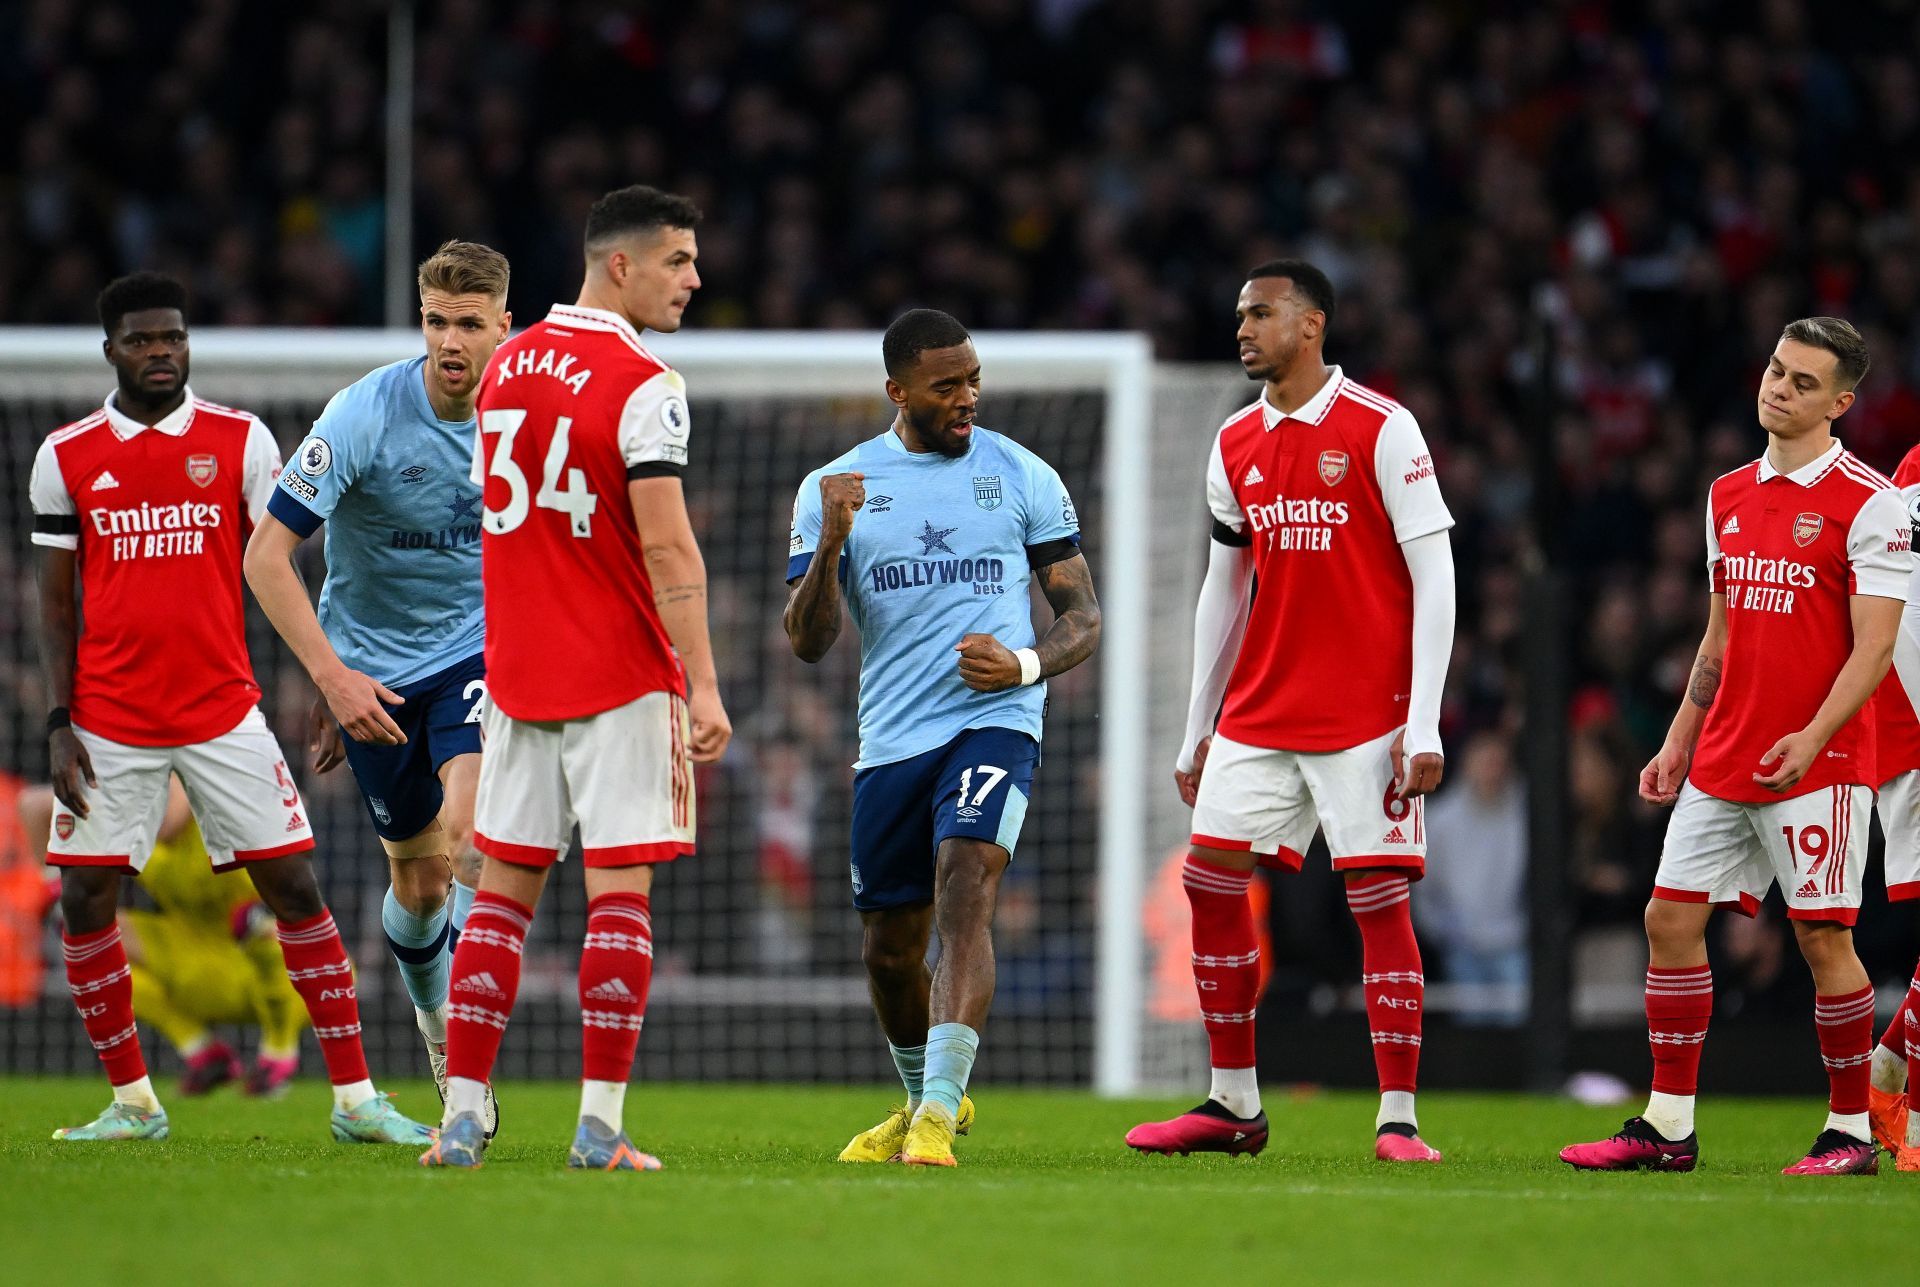 The Gunners have failed to win each of their last three matches